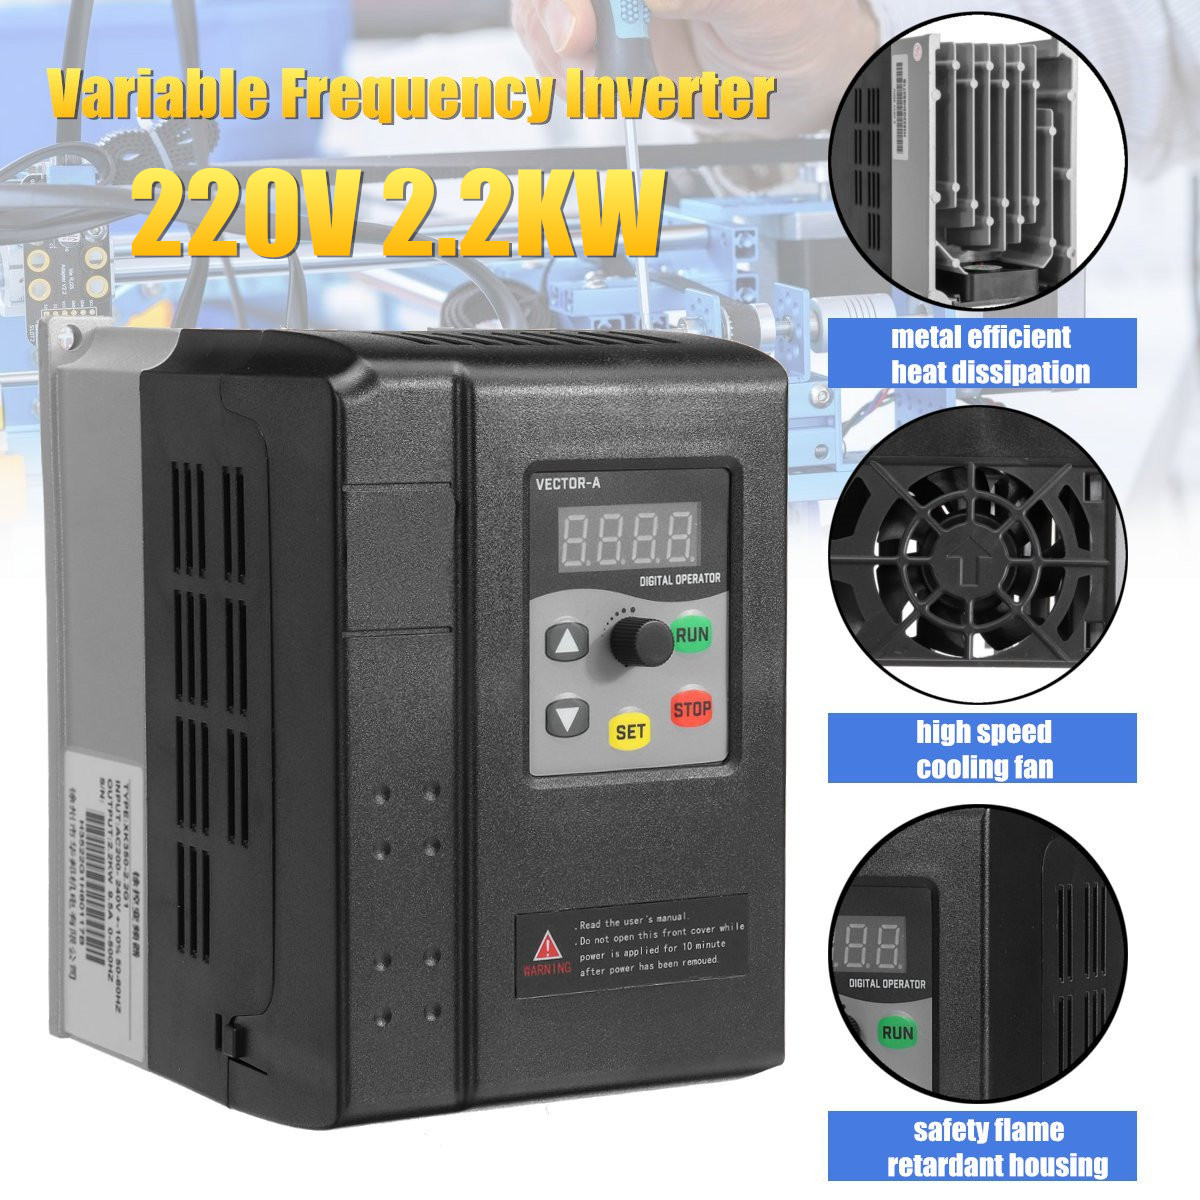 22KW-220V-95A-1HP-To-3-Phase-Variable-Frequency-Inverter-Motor-Drive-VSD-VFD-1392464-1